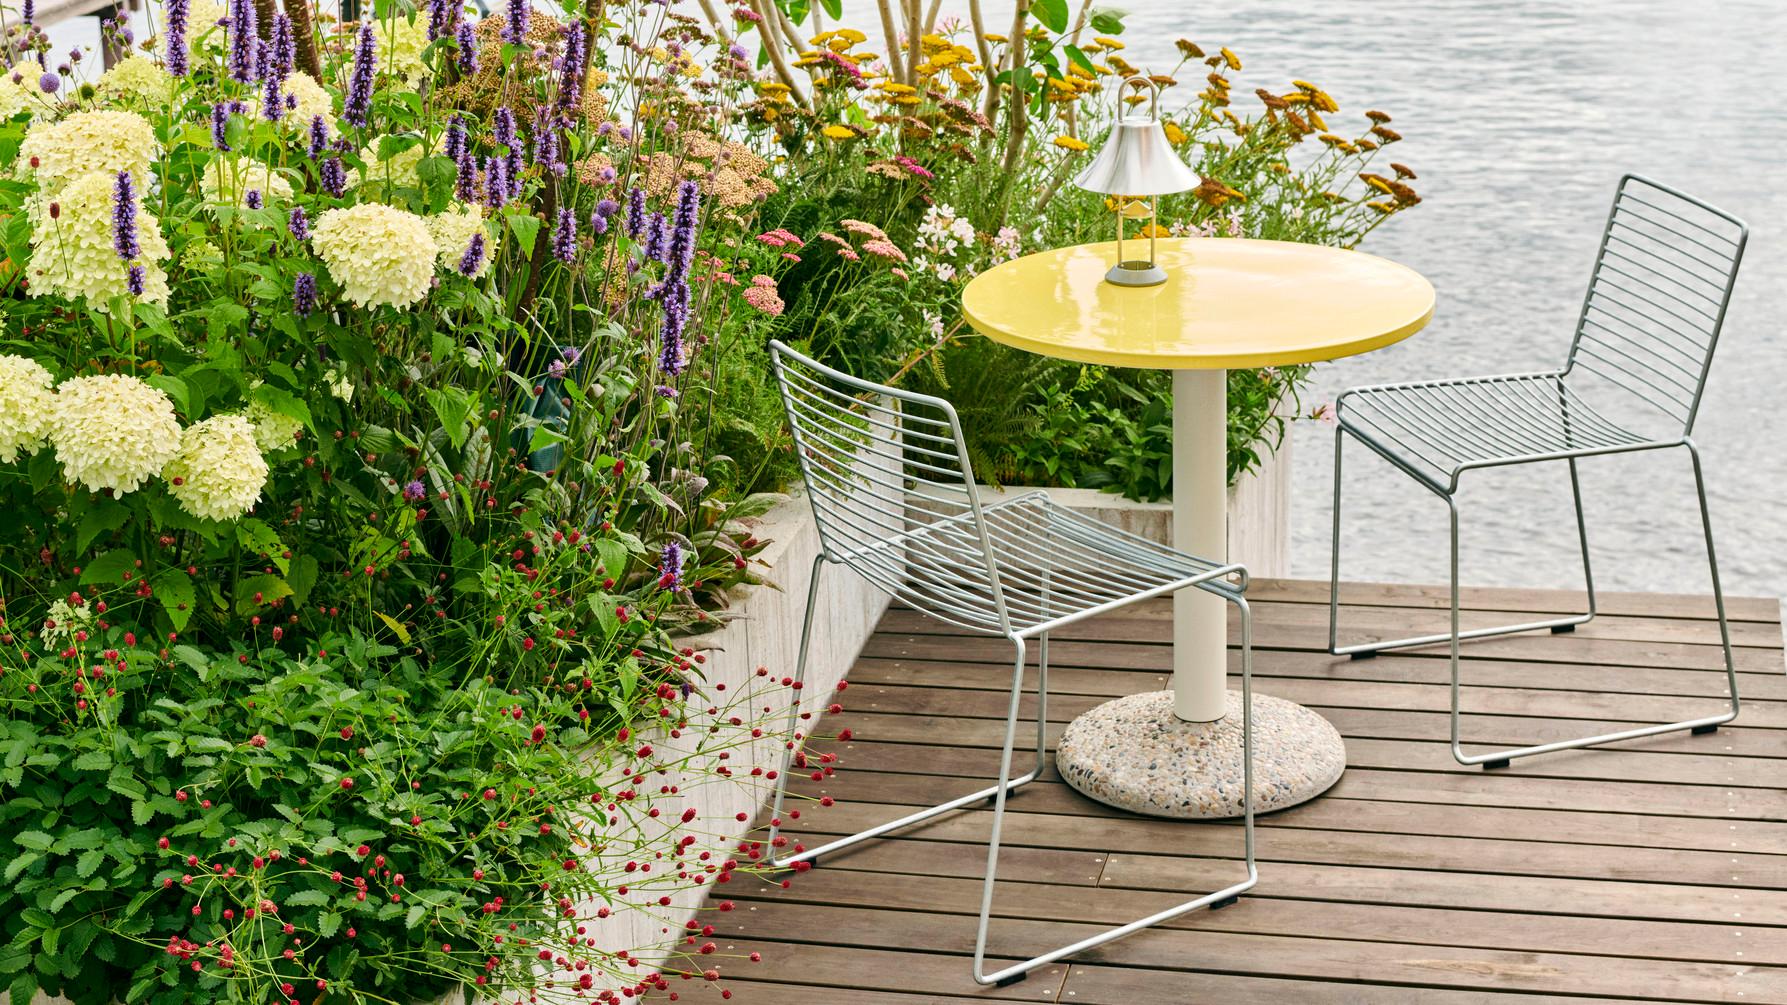 Contemporary Ceramic Table Ø70, Outdoor-Bright Yellow Porcelain-by Muller Van Severen for Hay For Sale